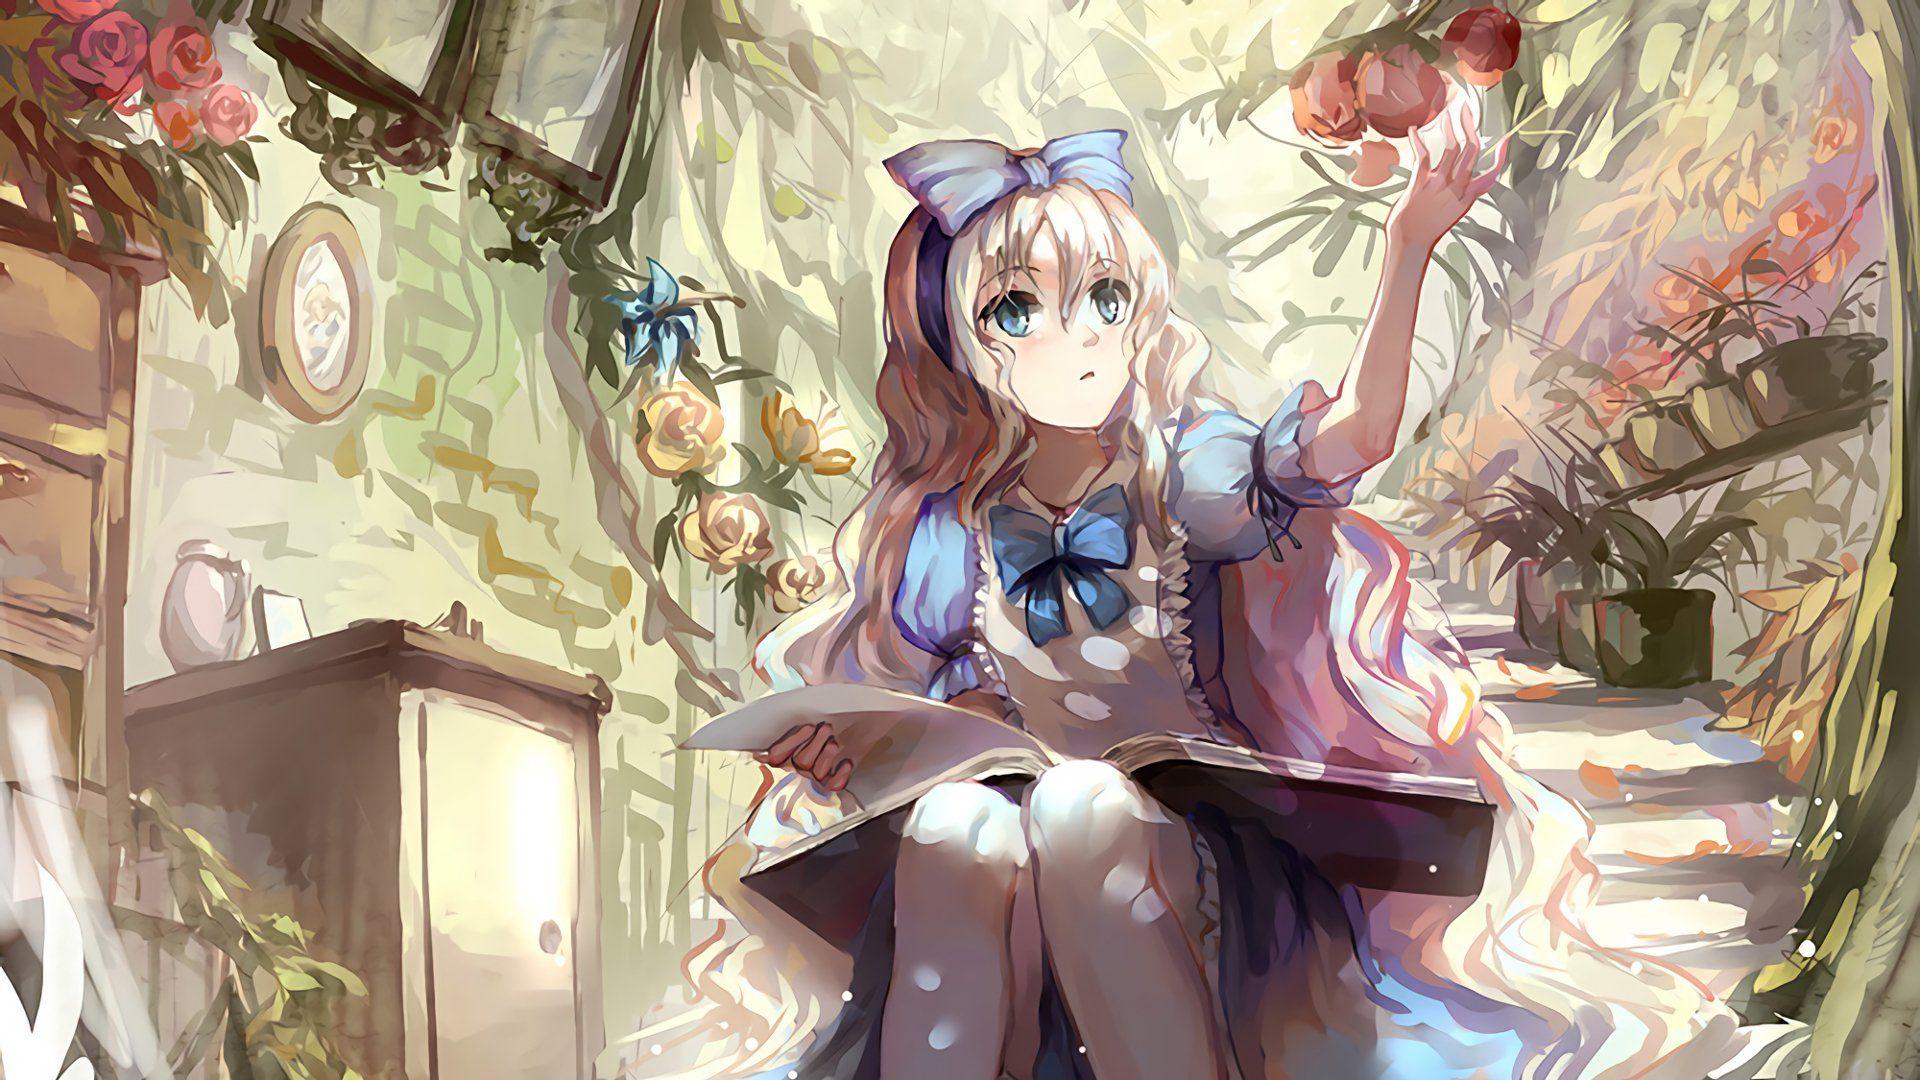 Not Idolized  Alice In Wonderland Outfit Anime PNG Image  Transparent PNG  Free Download on SeekPNG